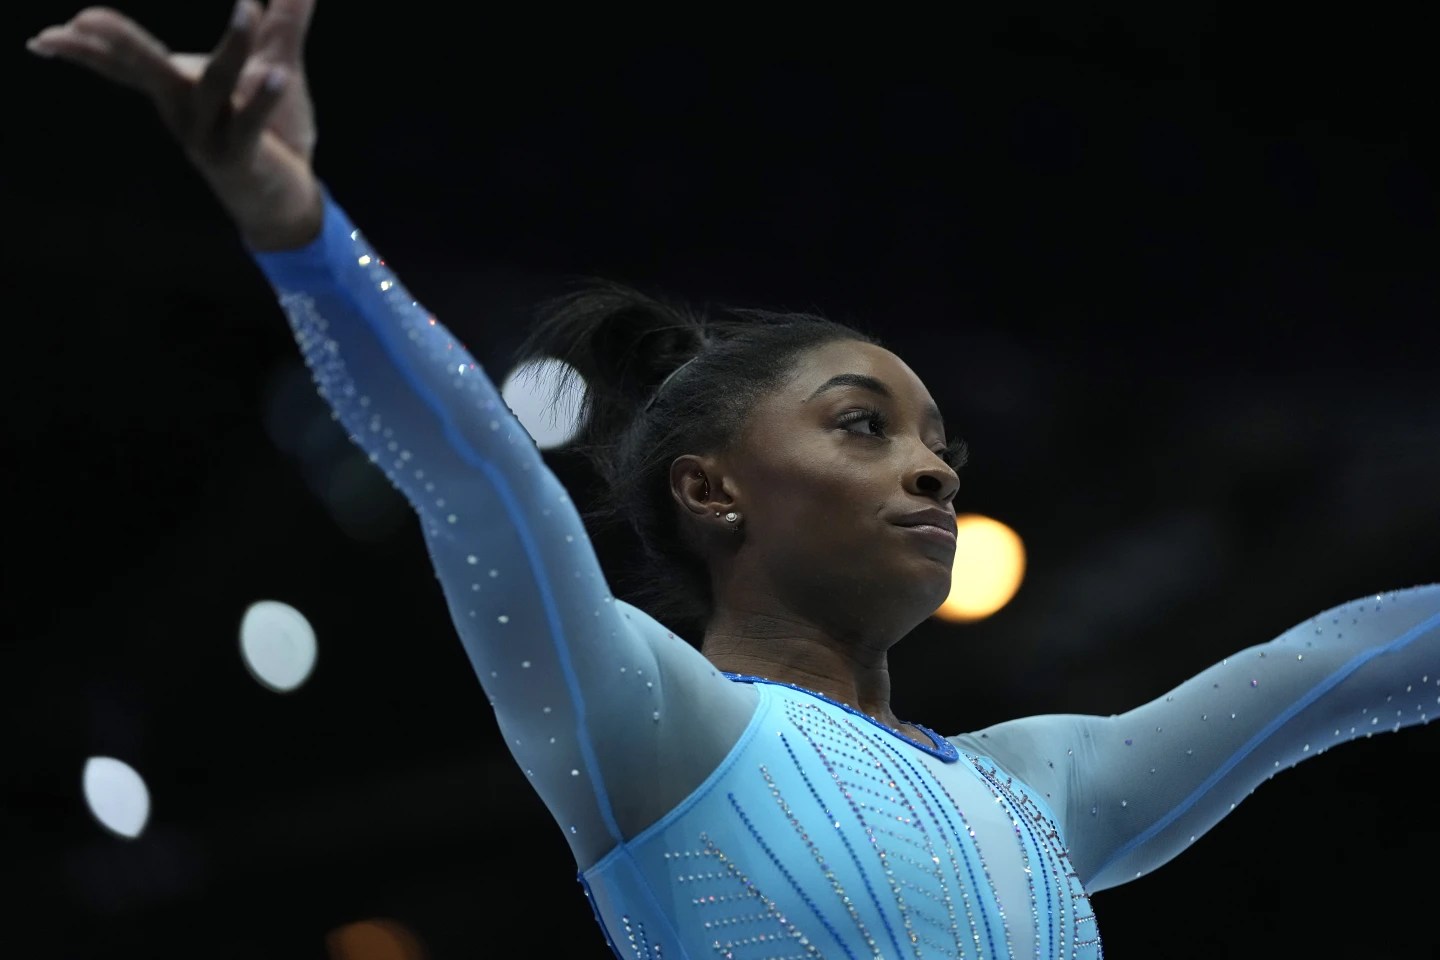 Simone Biles leads a dominant US performance at the world gymnastics championships